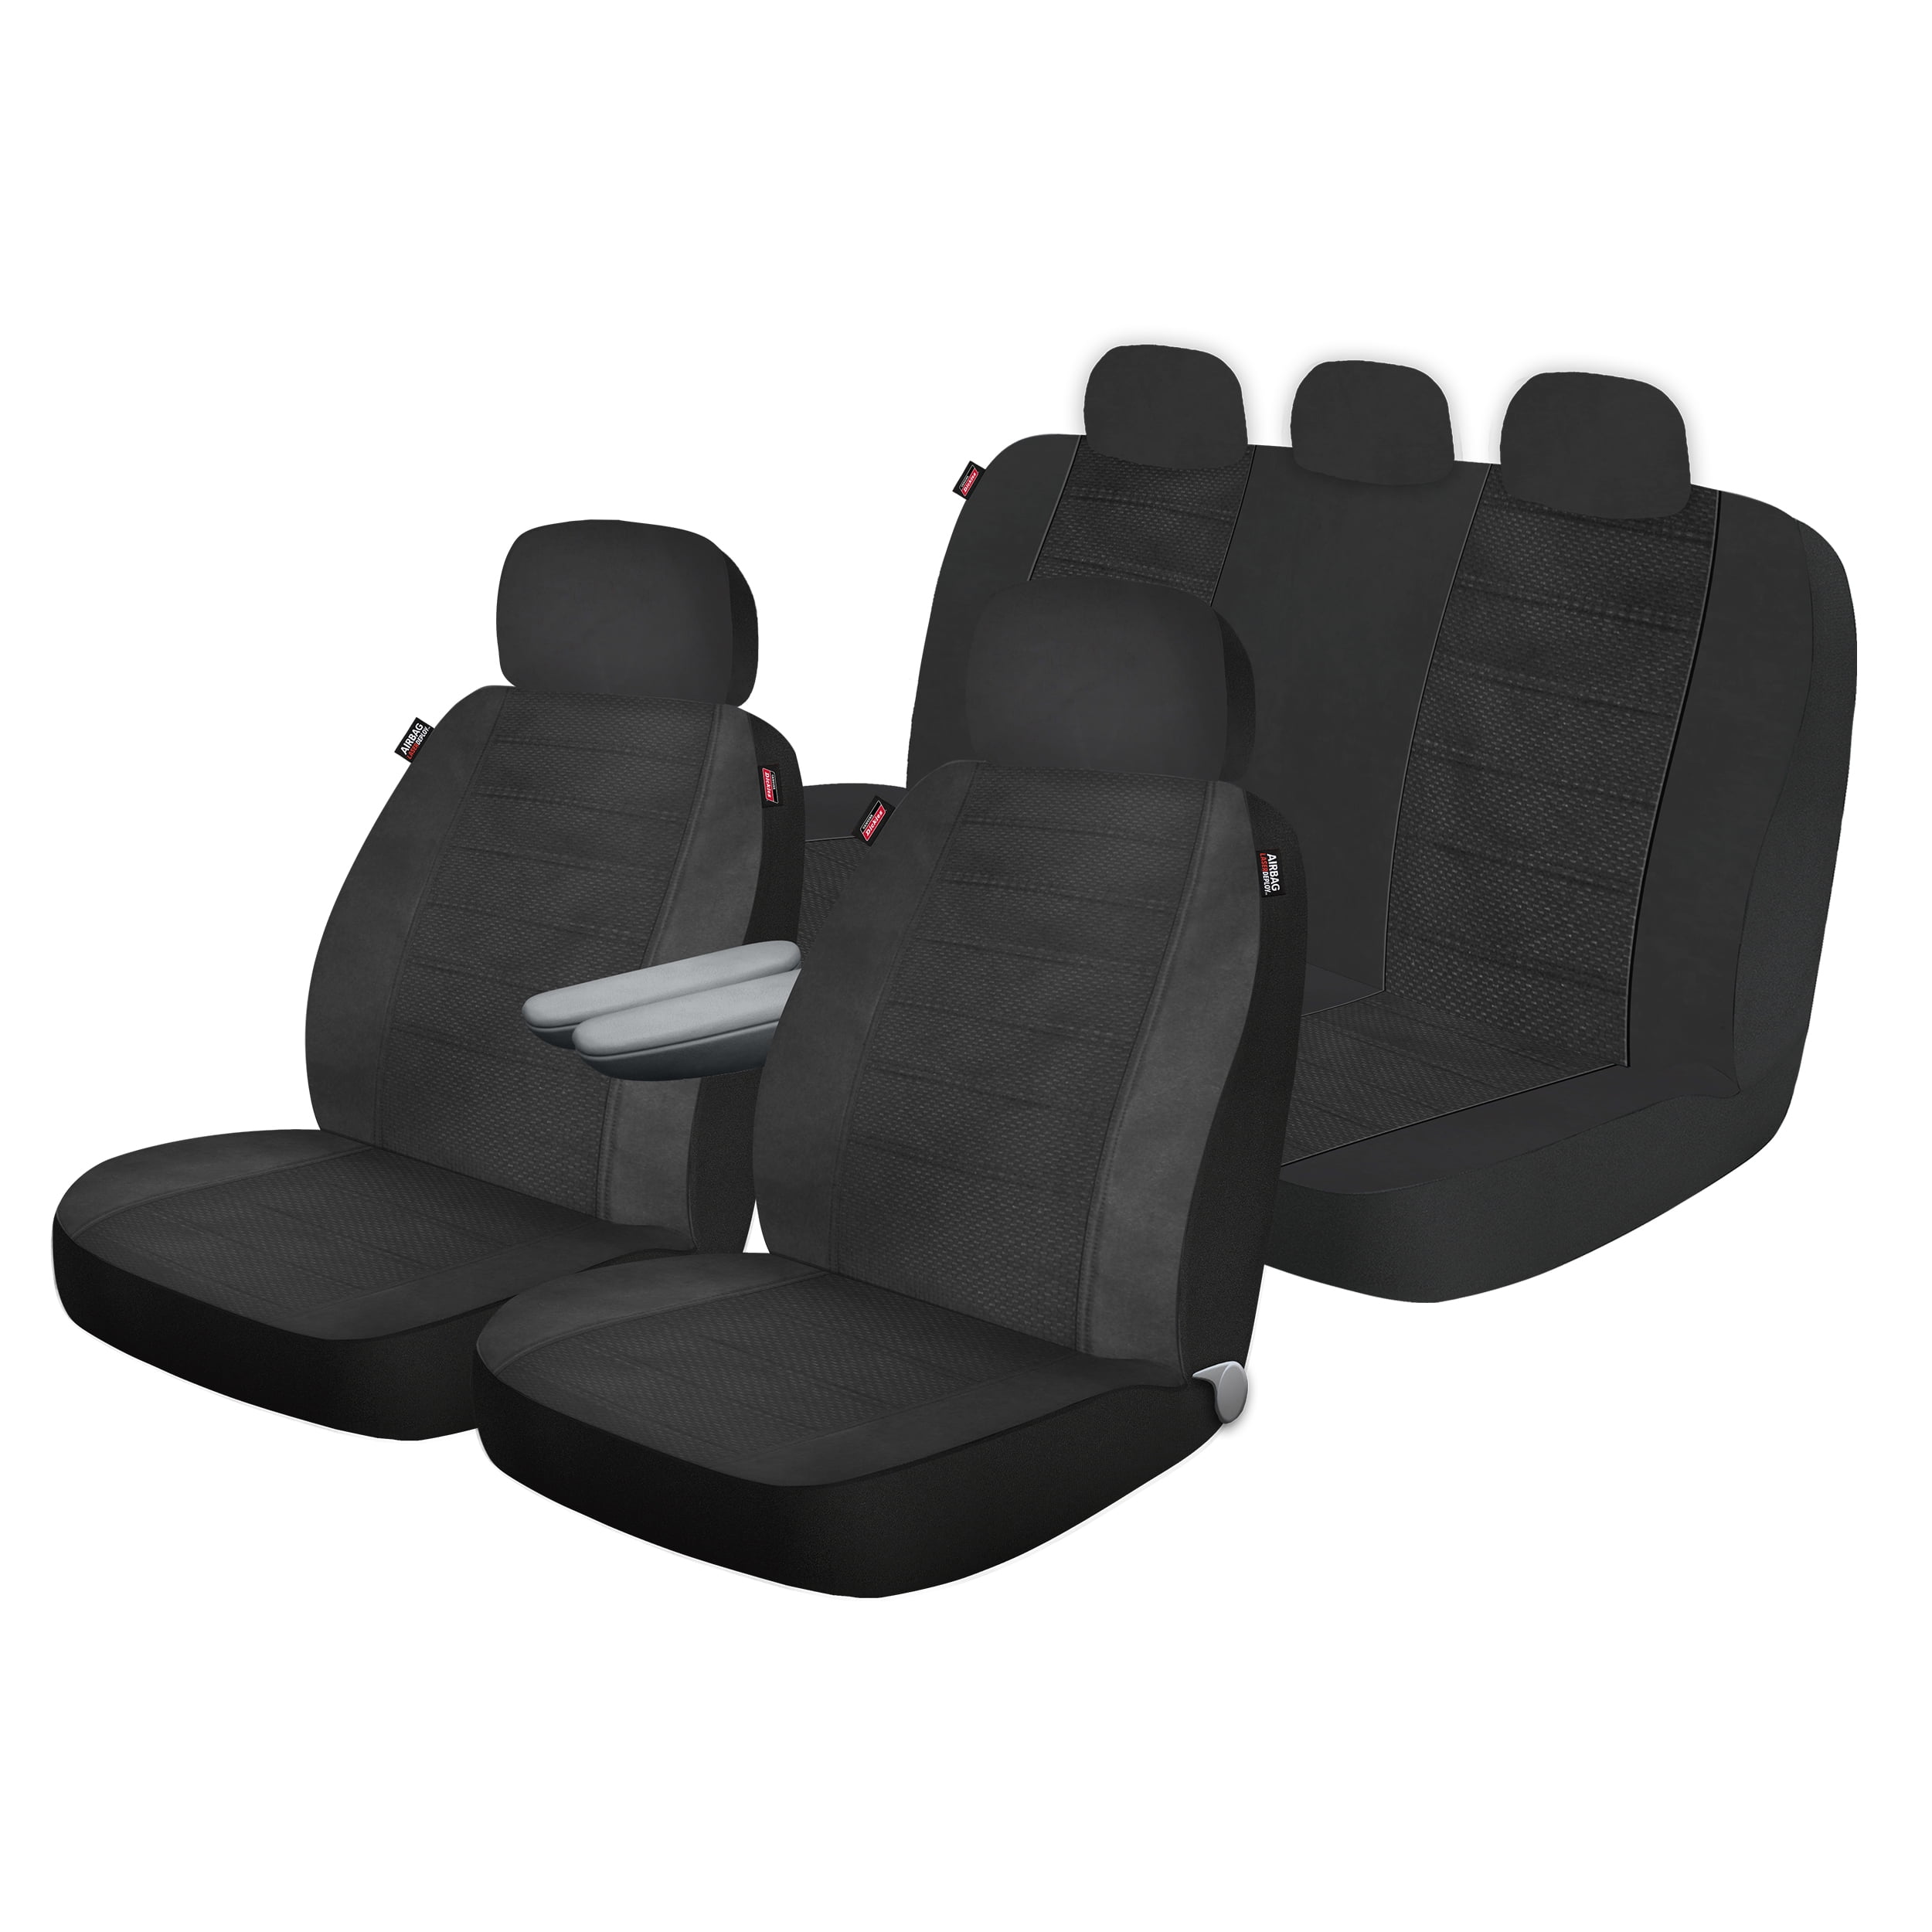 New Sleek Black Flat Cloth Front Rear Car Truck Seat Covers Set For Toyota 